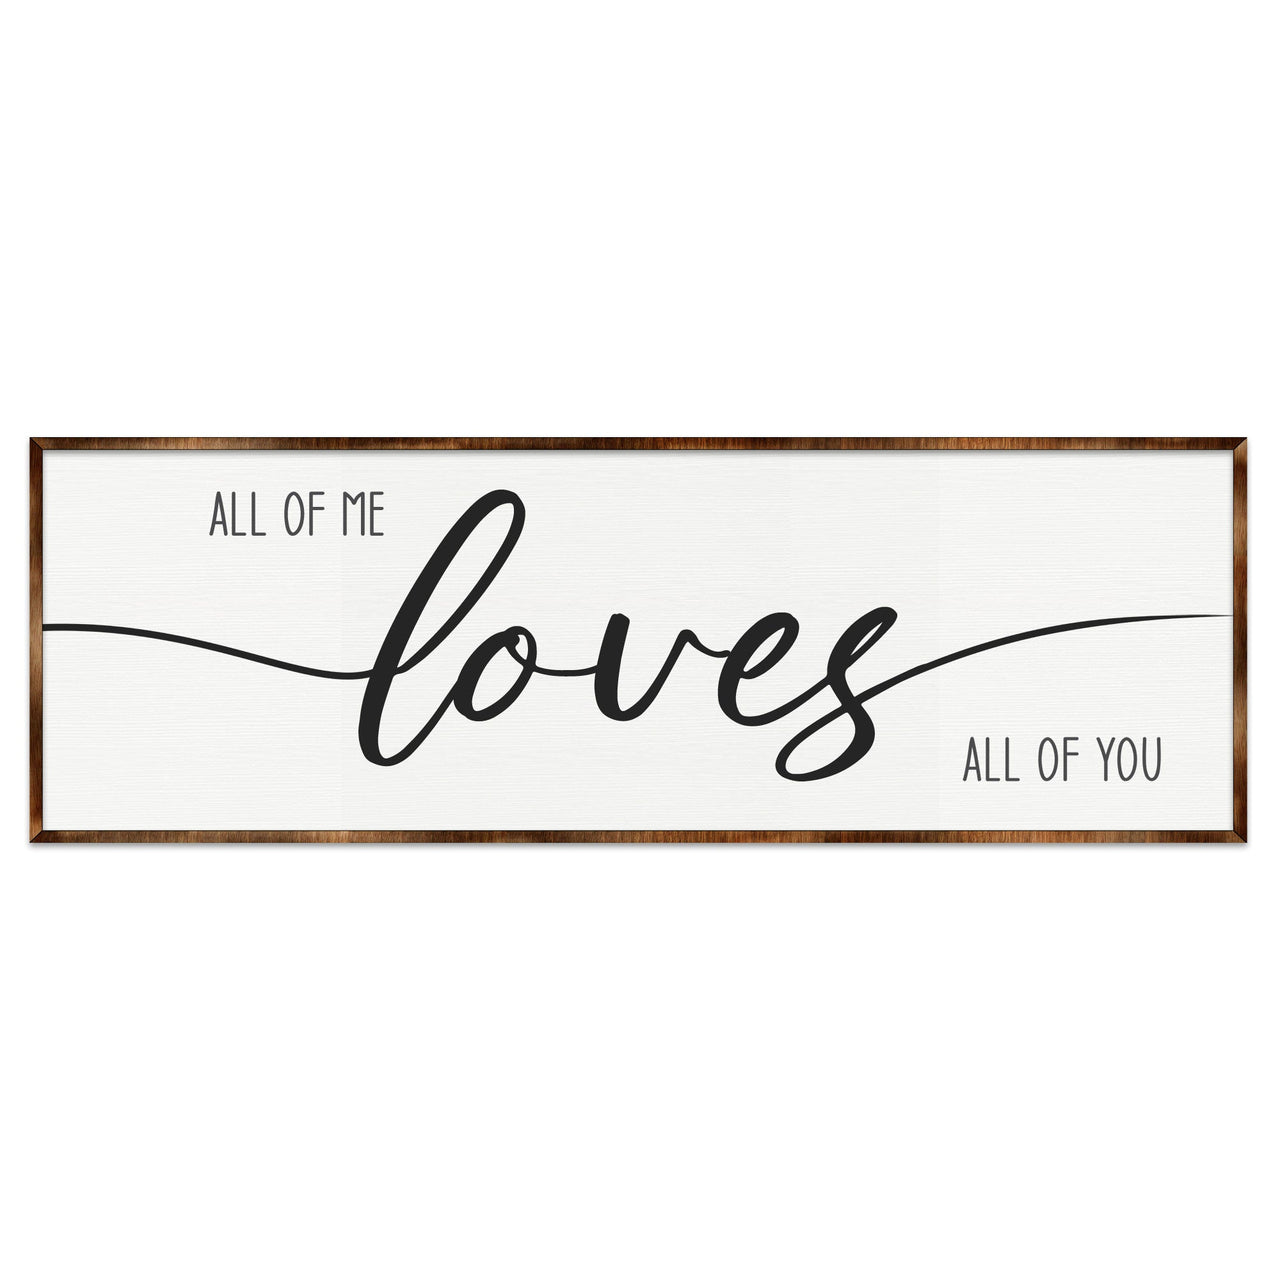 All of Me Loves All of You | Wooden Home Décor | Master Bedroom Sign | Home Gift | Couple's Gift | Farmhouse Décor - 310321-6